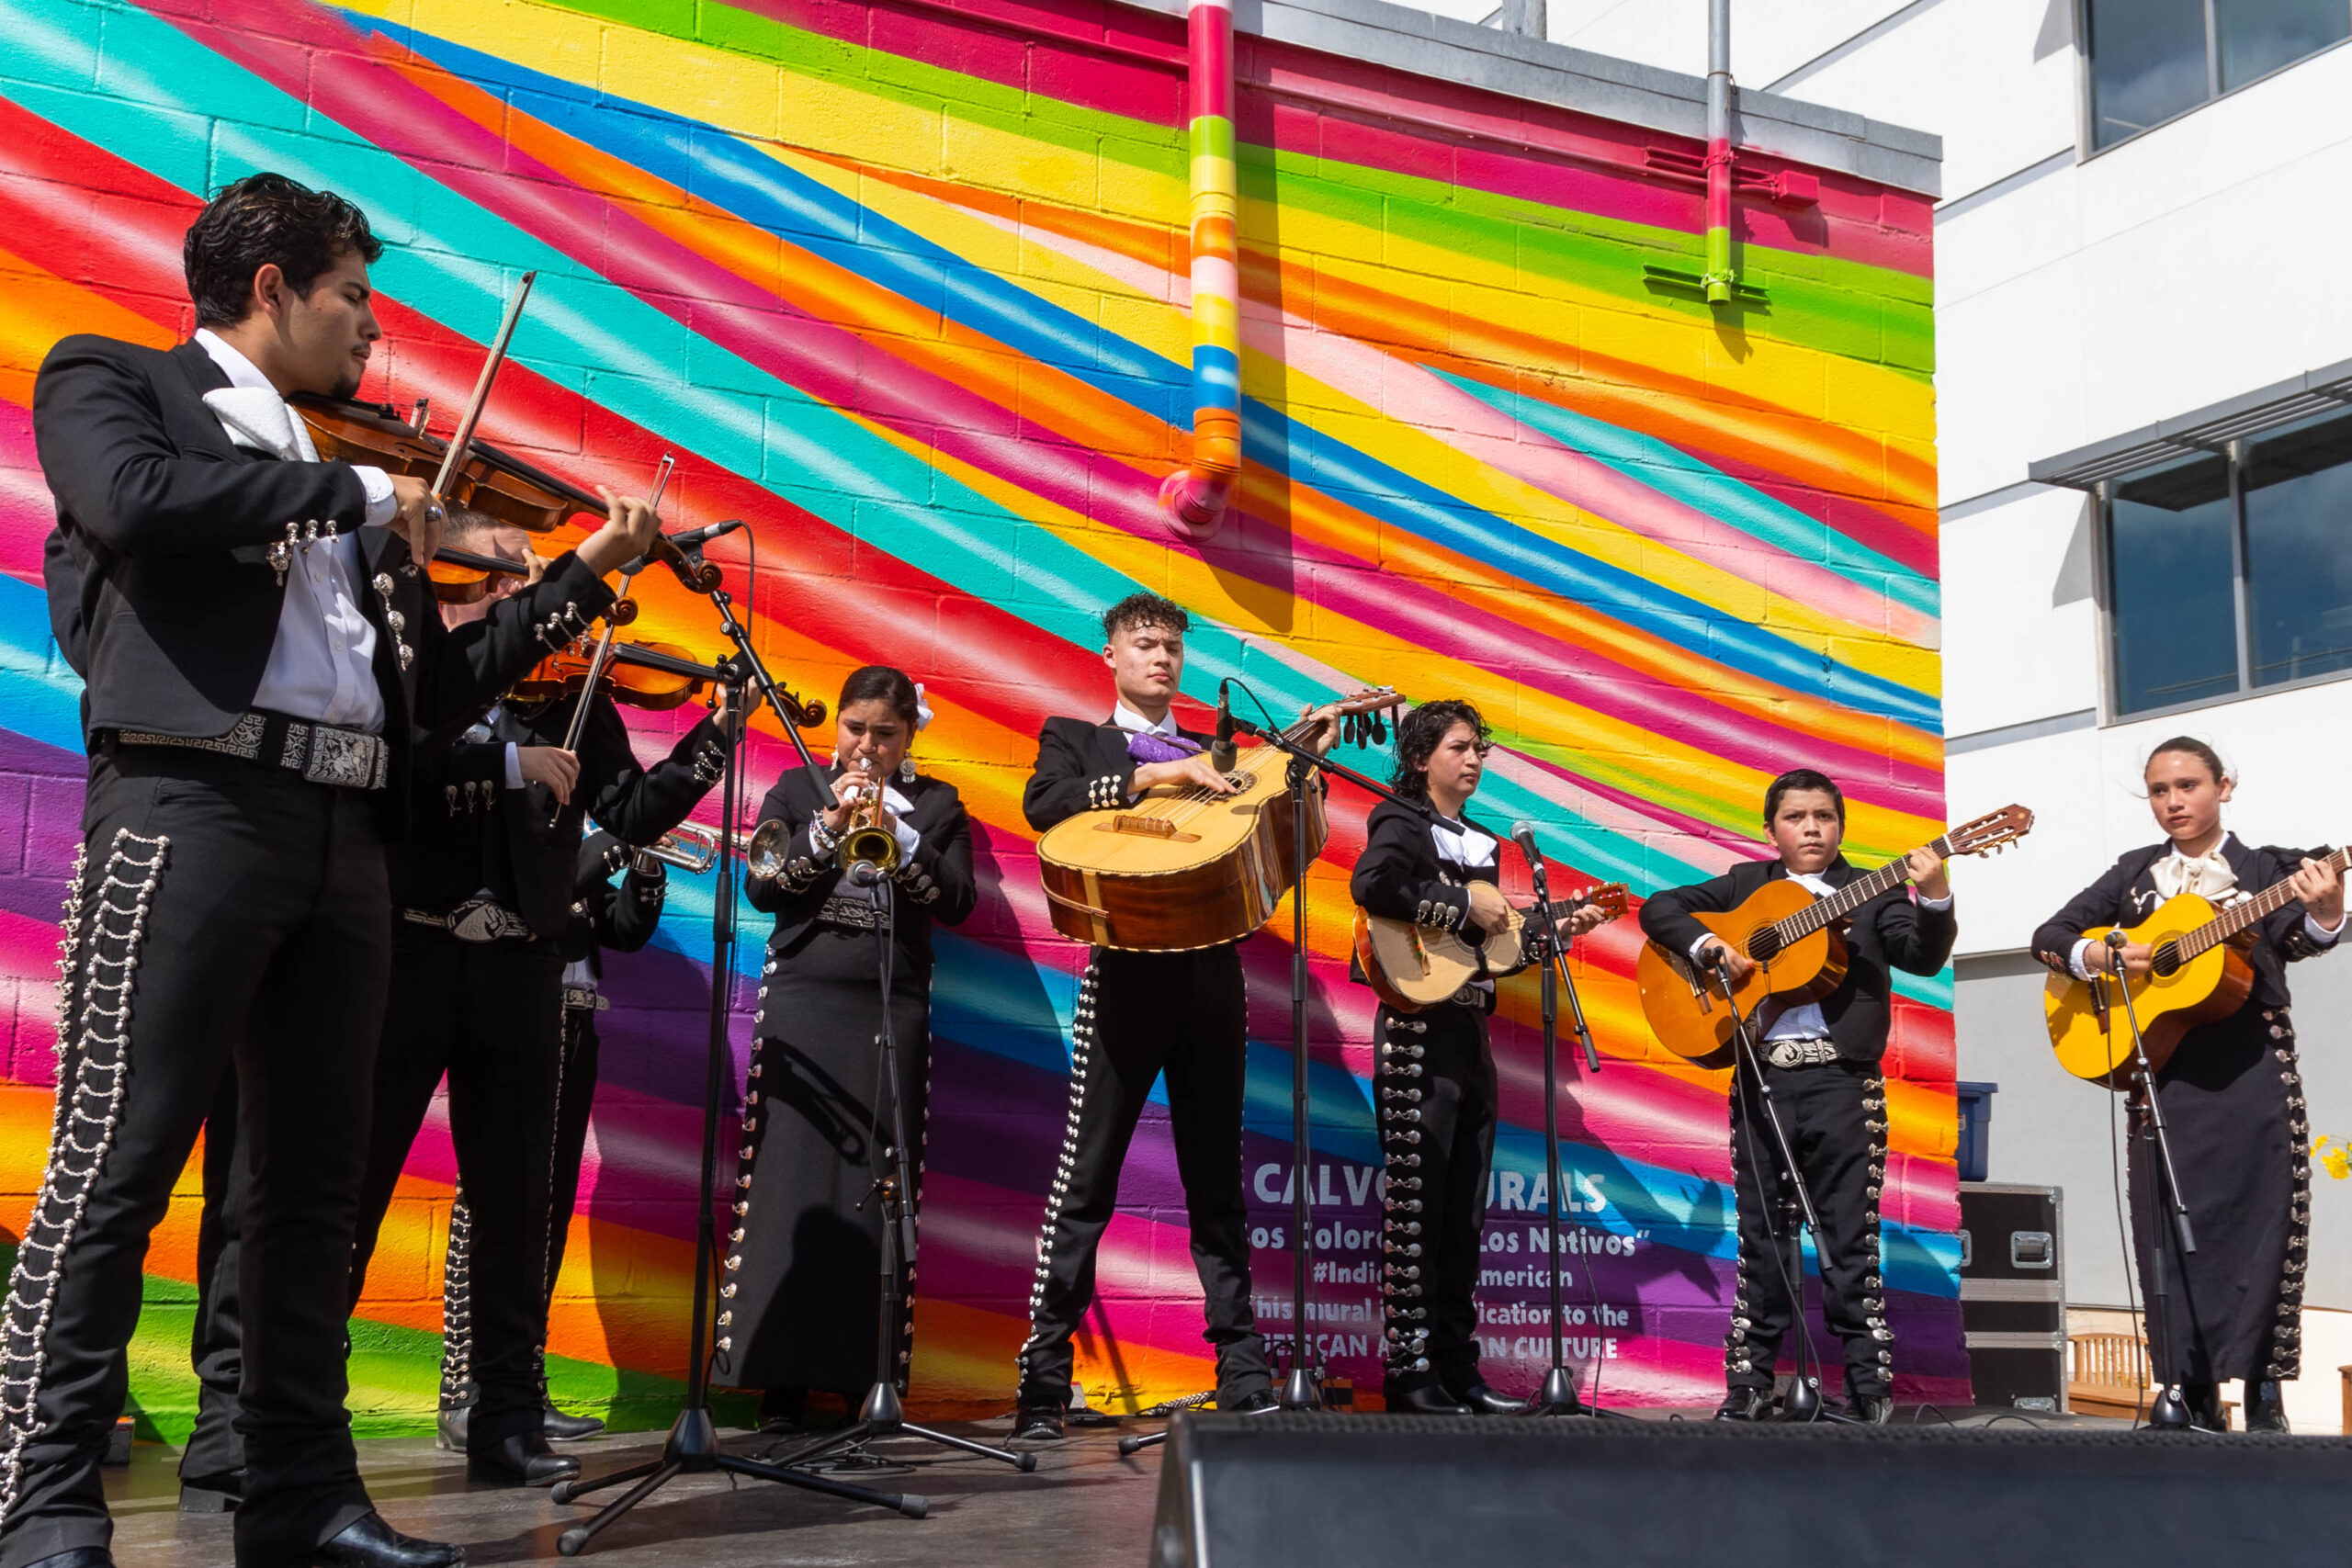 Mariachi performers